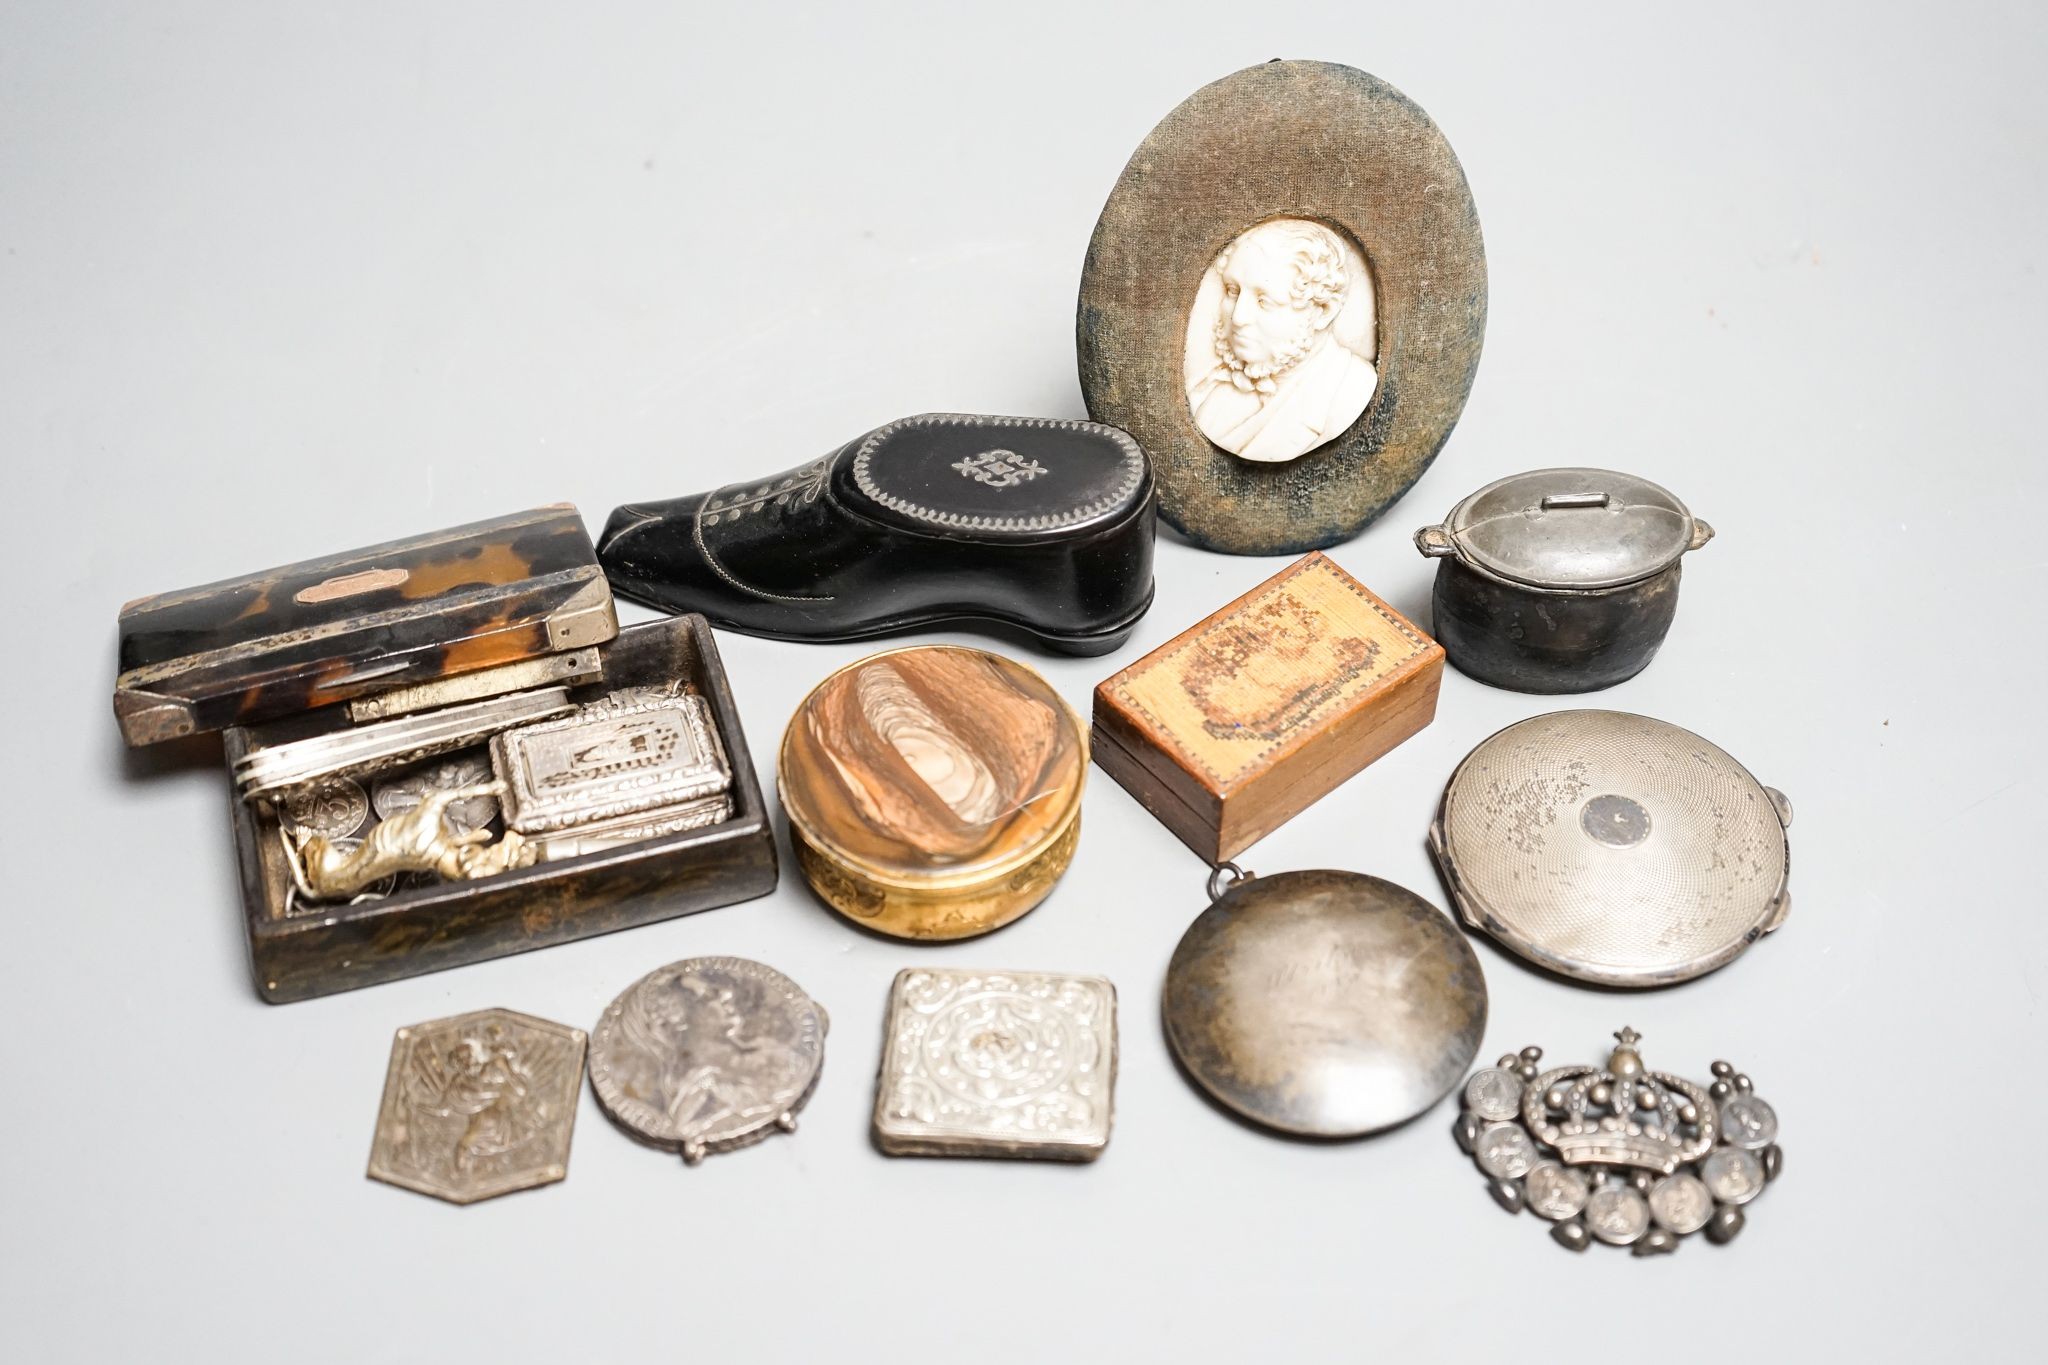 A collection of cabinet curios, including - An early 19th century miniature carved ivory bust of a gentleman, a gilt metal and agate snuff box, a George IV silver vinaigrette, by Taylor and Perry, a silver compact, a Reg